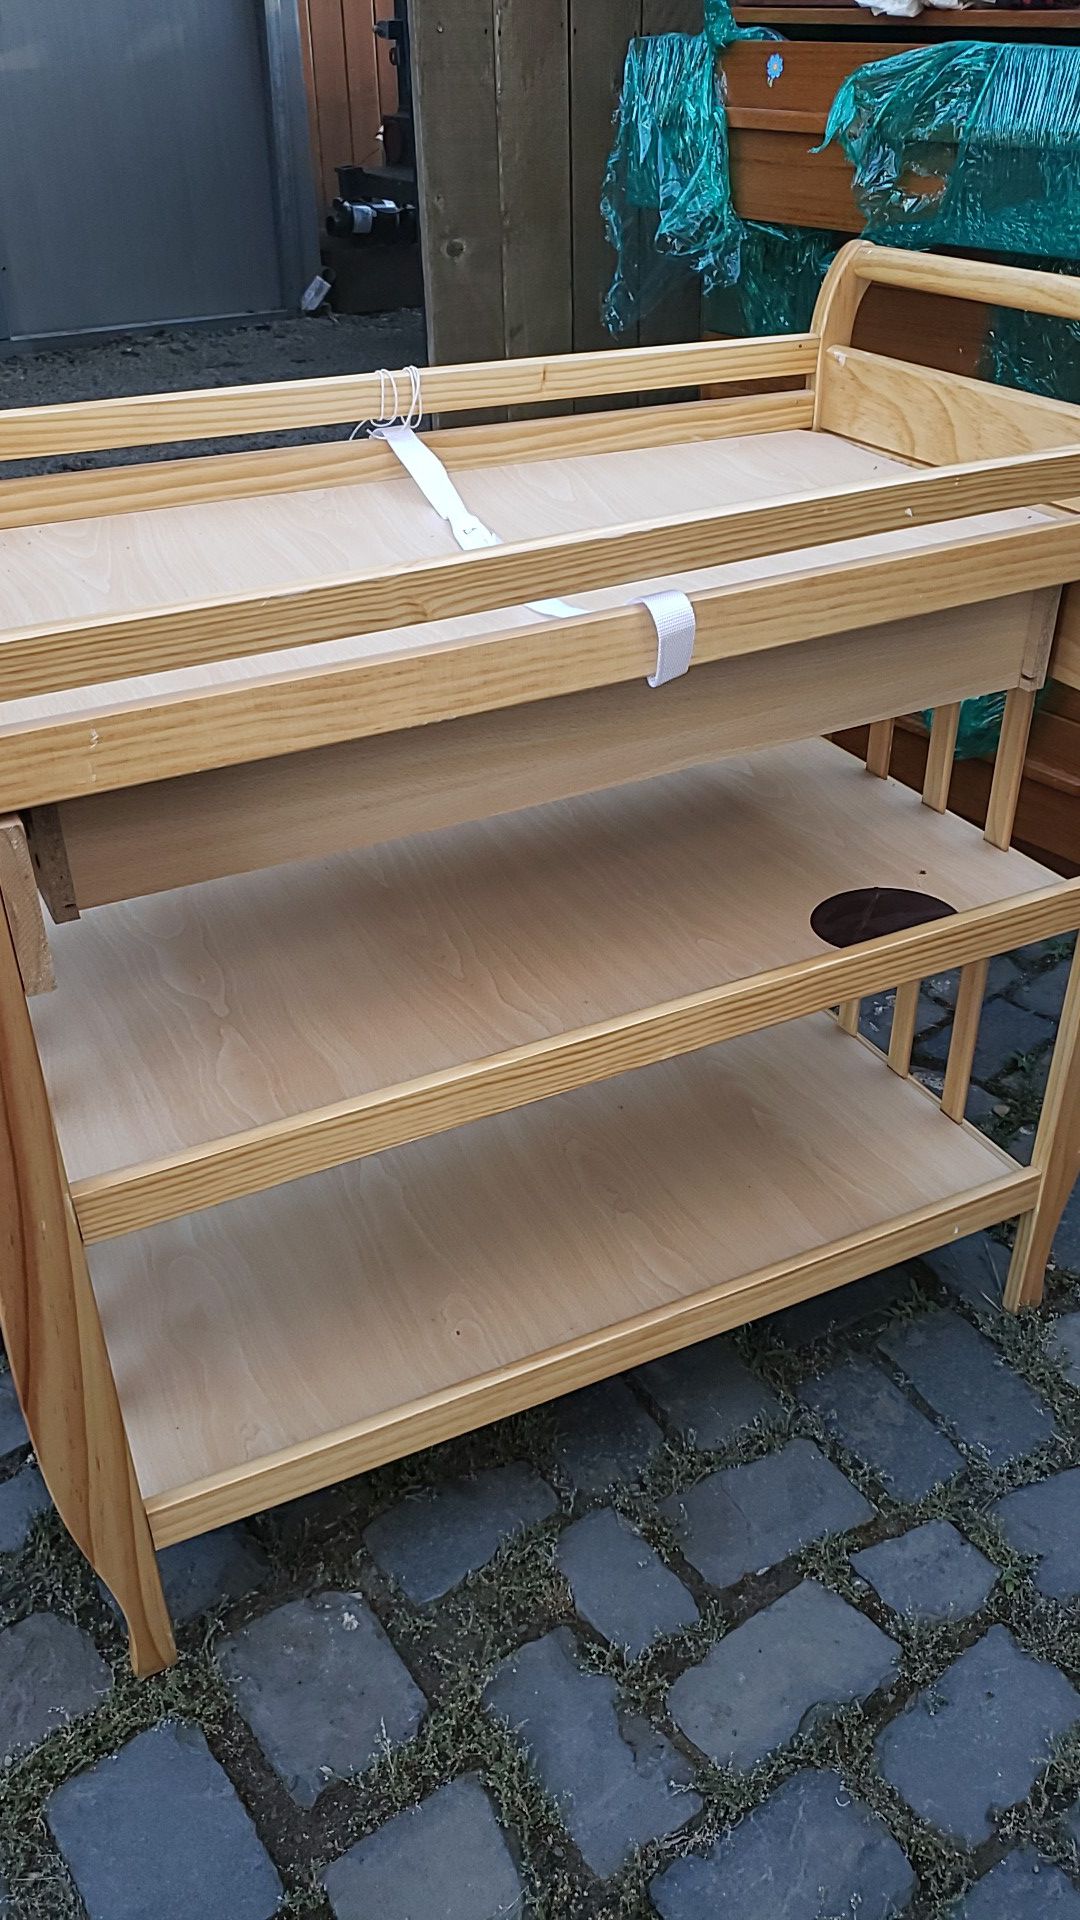 Changing table, used